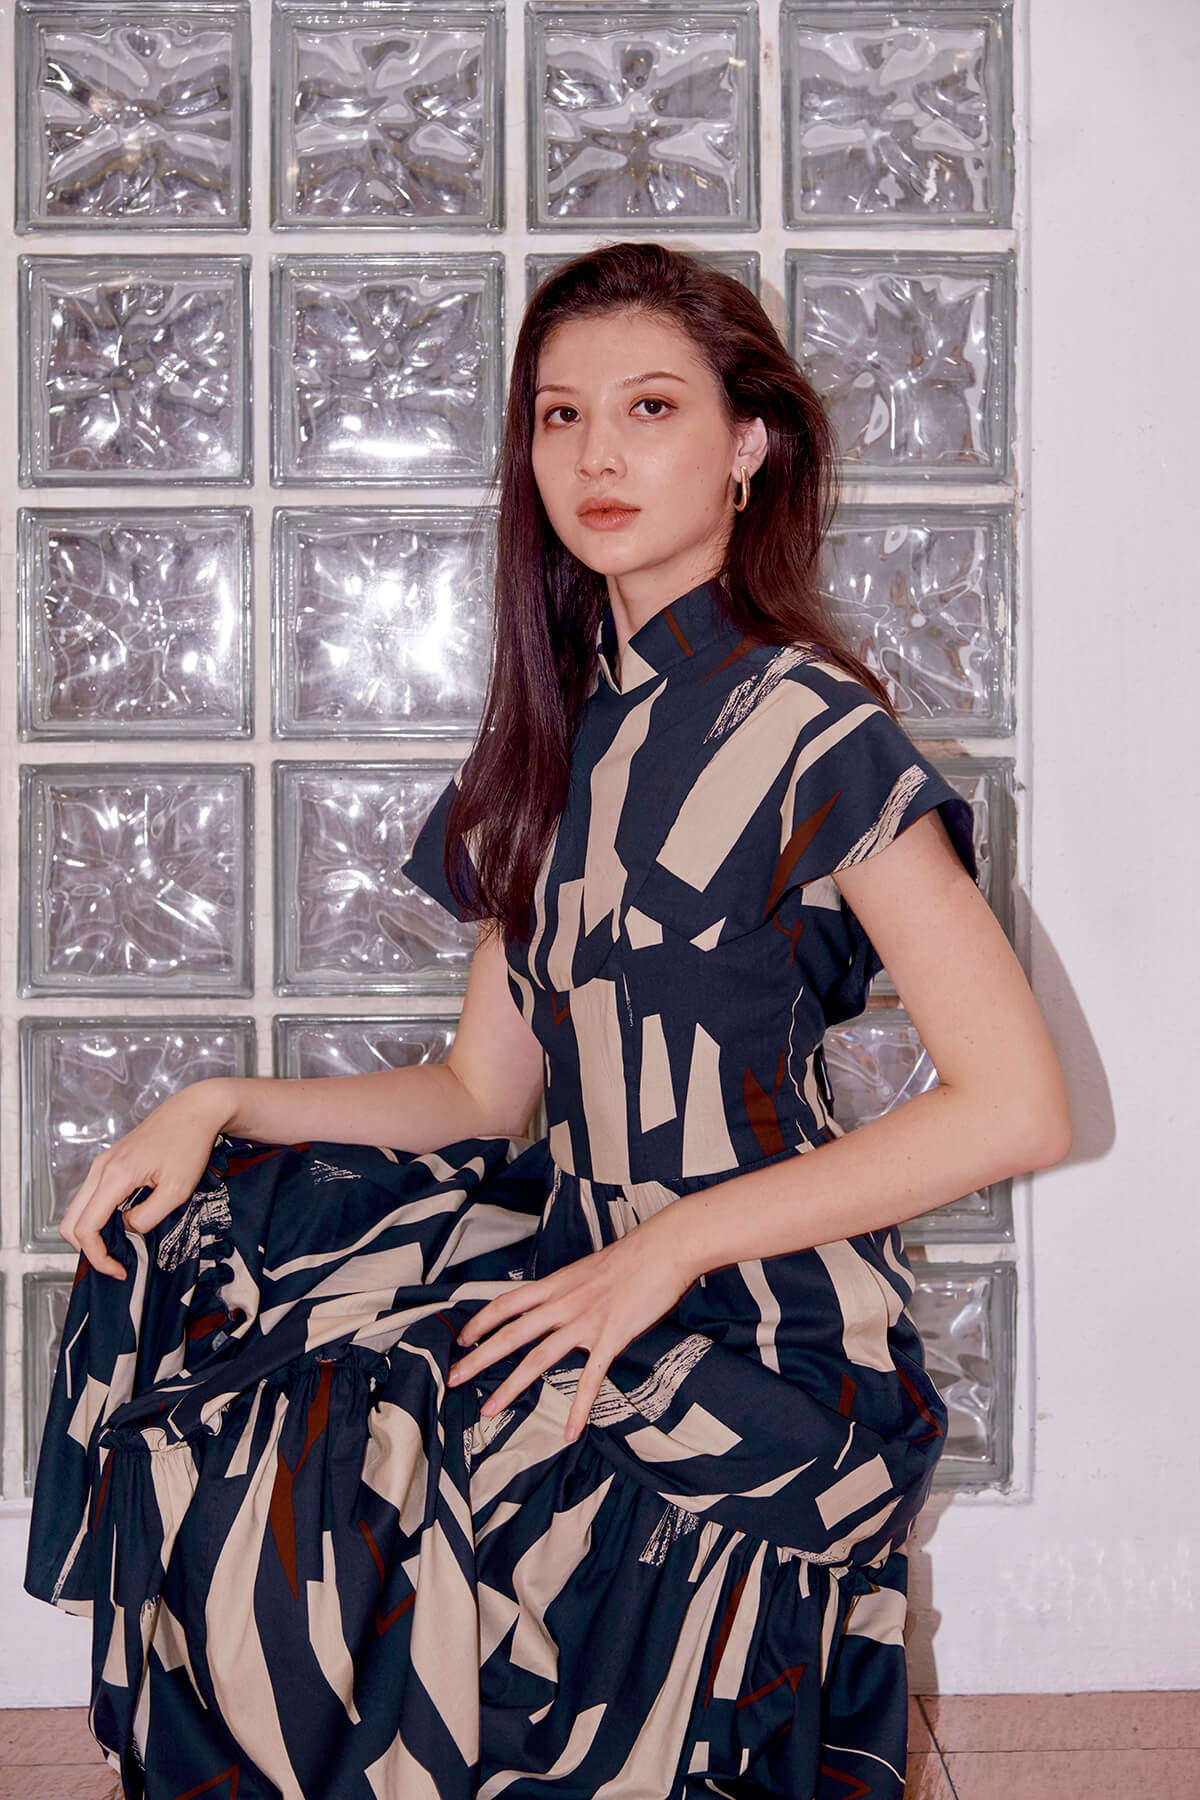 Eurasian model squats against a wall. She is wearing a long cheongsam dress, with her right arm resting on her right knee and left arm on her left thigh. The qipao dress has cape like sleeves and a gathered skirt in maxi length.